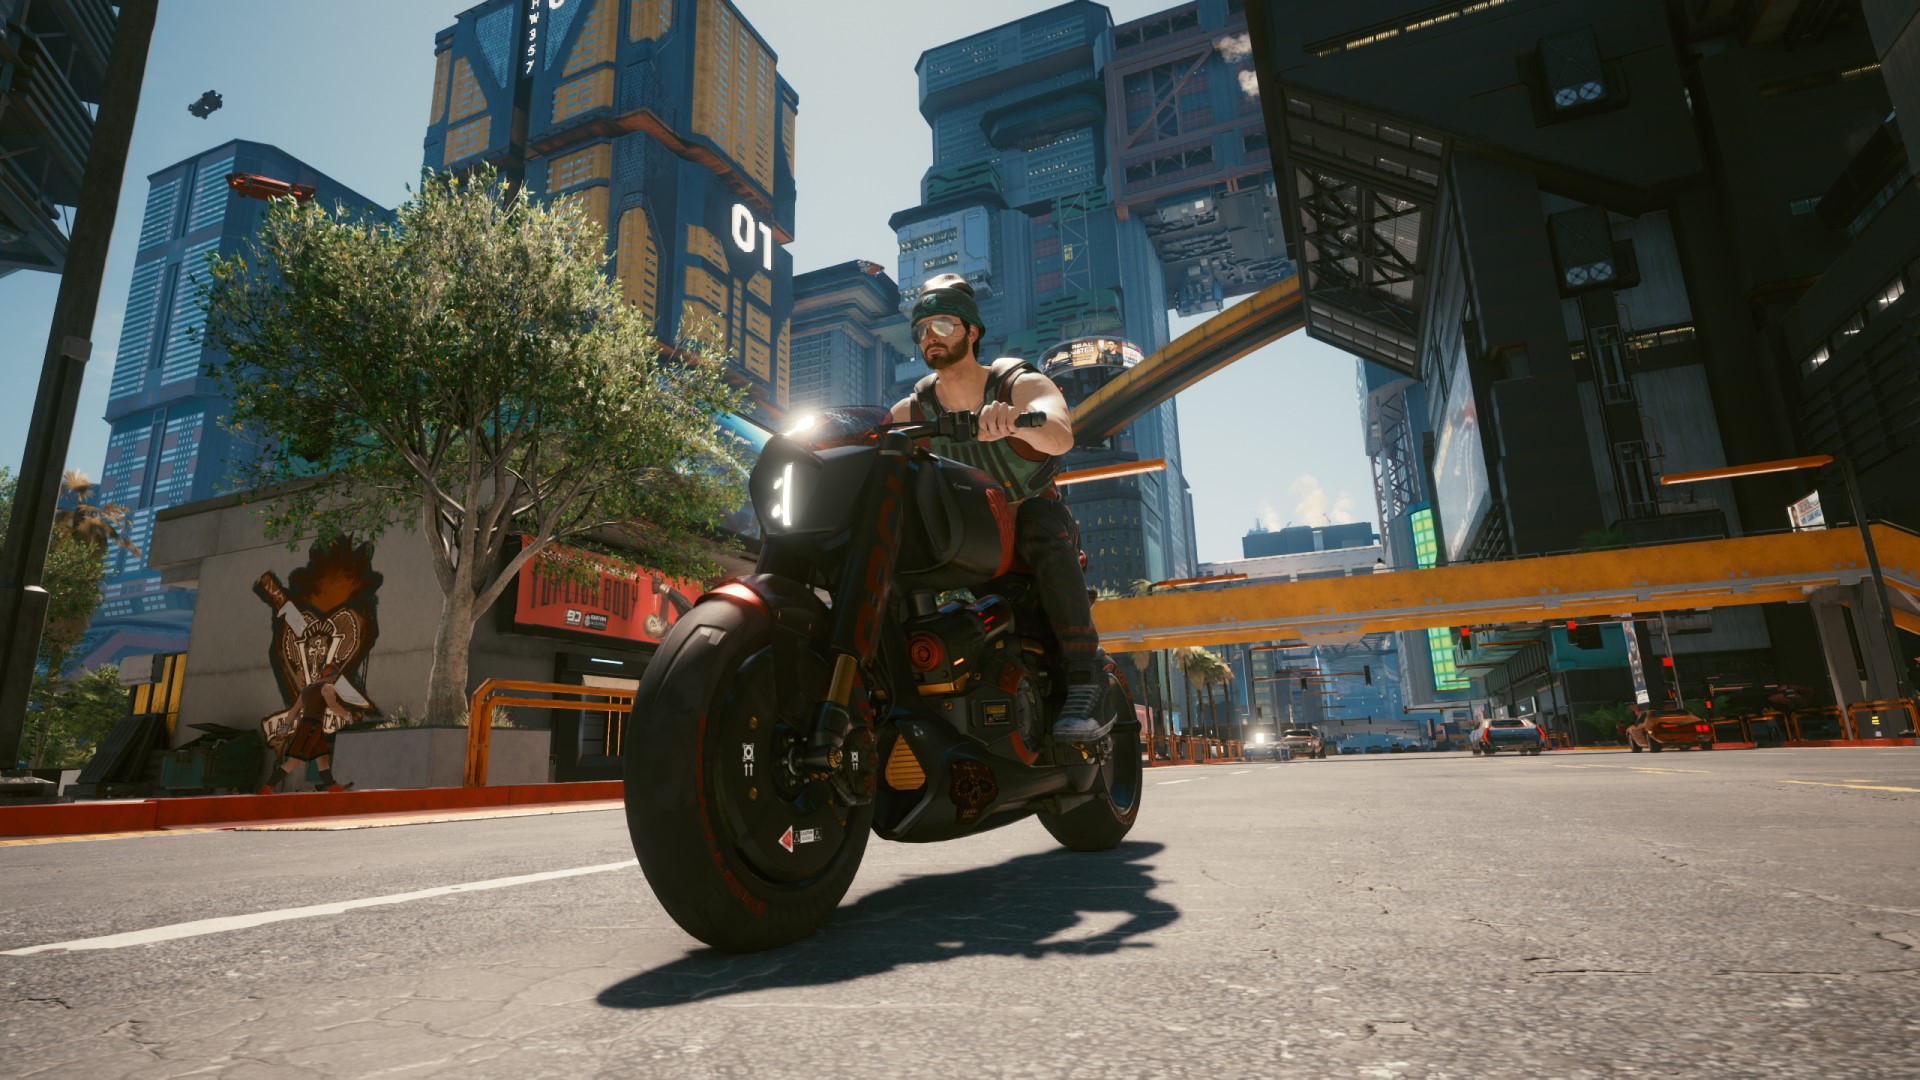 This Cyberpunk 2077 mod adds American-style health insurance for when V gets hurt